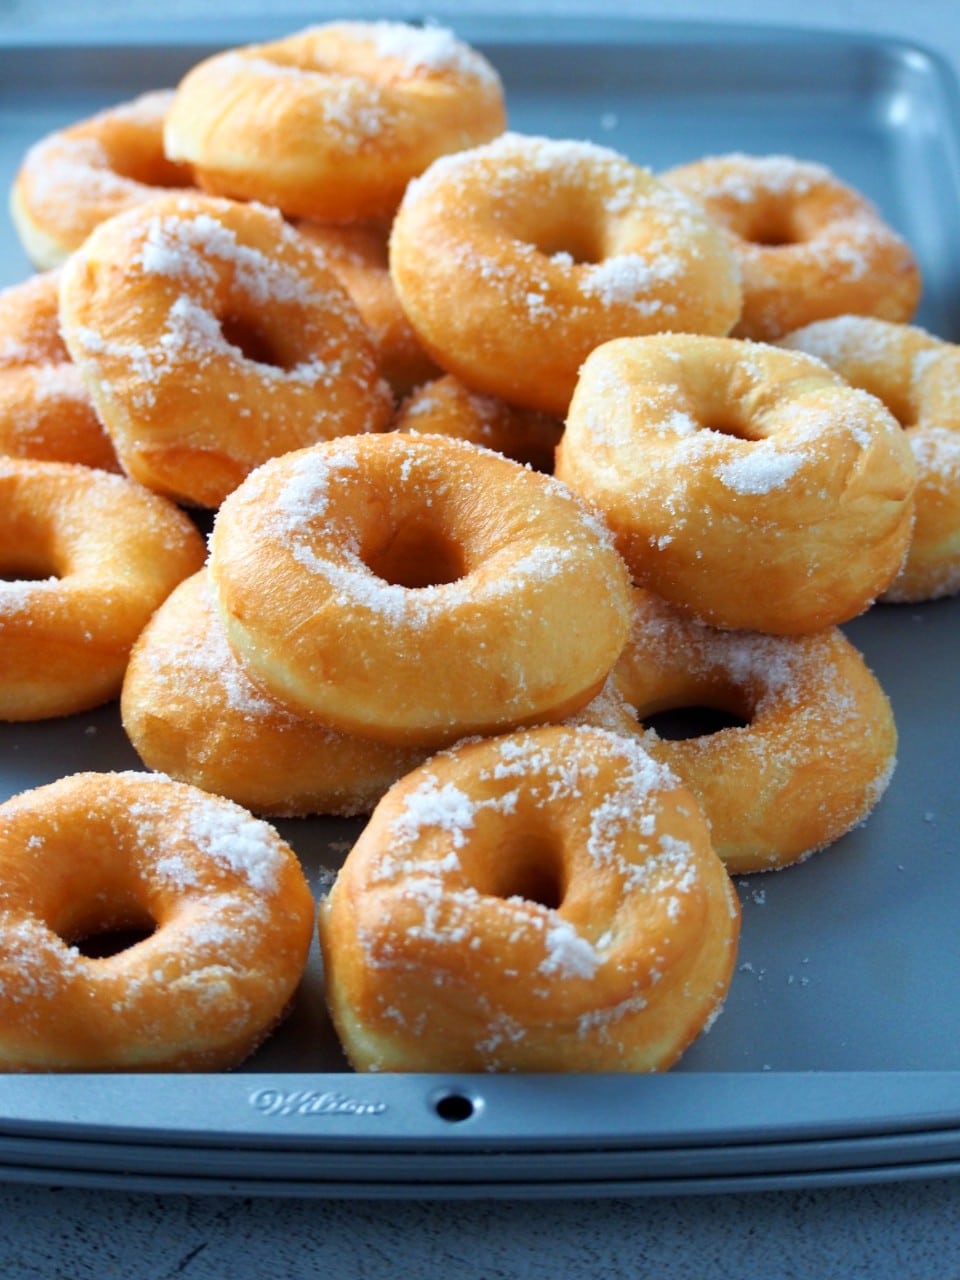 Freshly fried donuts on a baking pan.